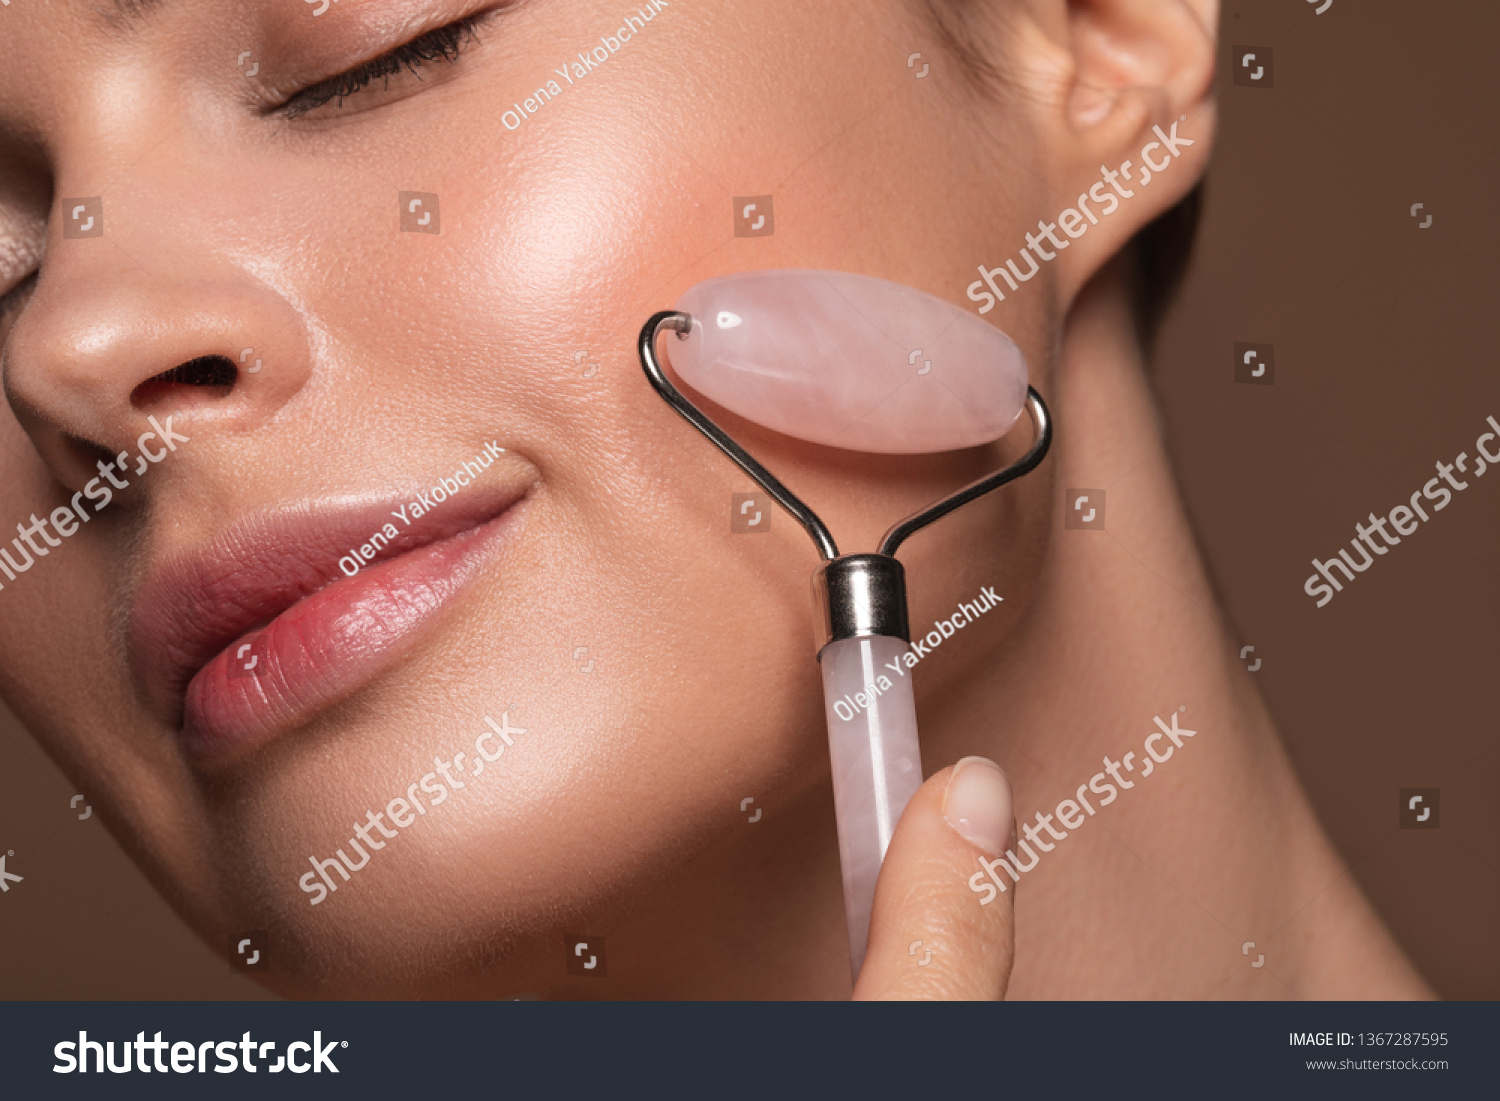 Close up photo of a young woman looking relaxed and smiling while using a natural rose quartz face roller #1367287595